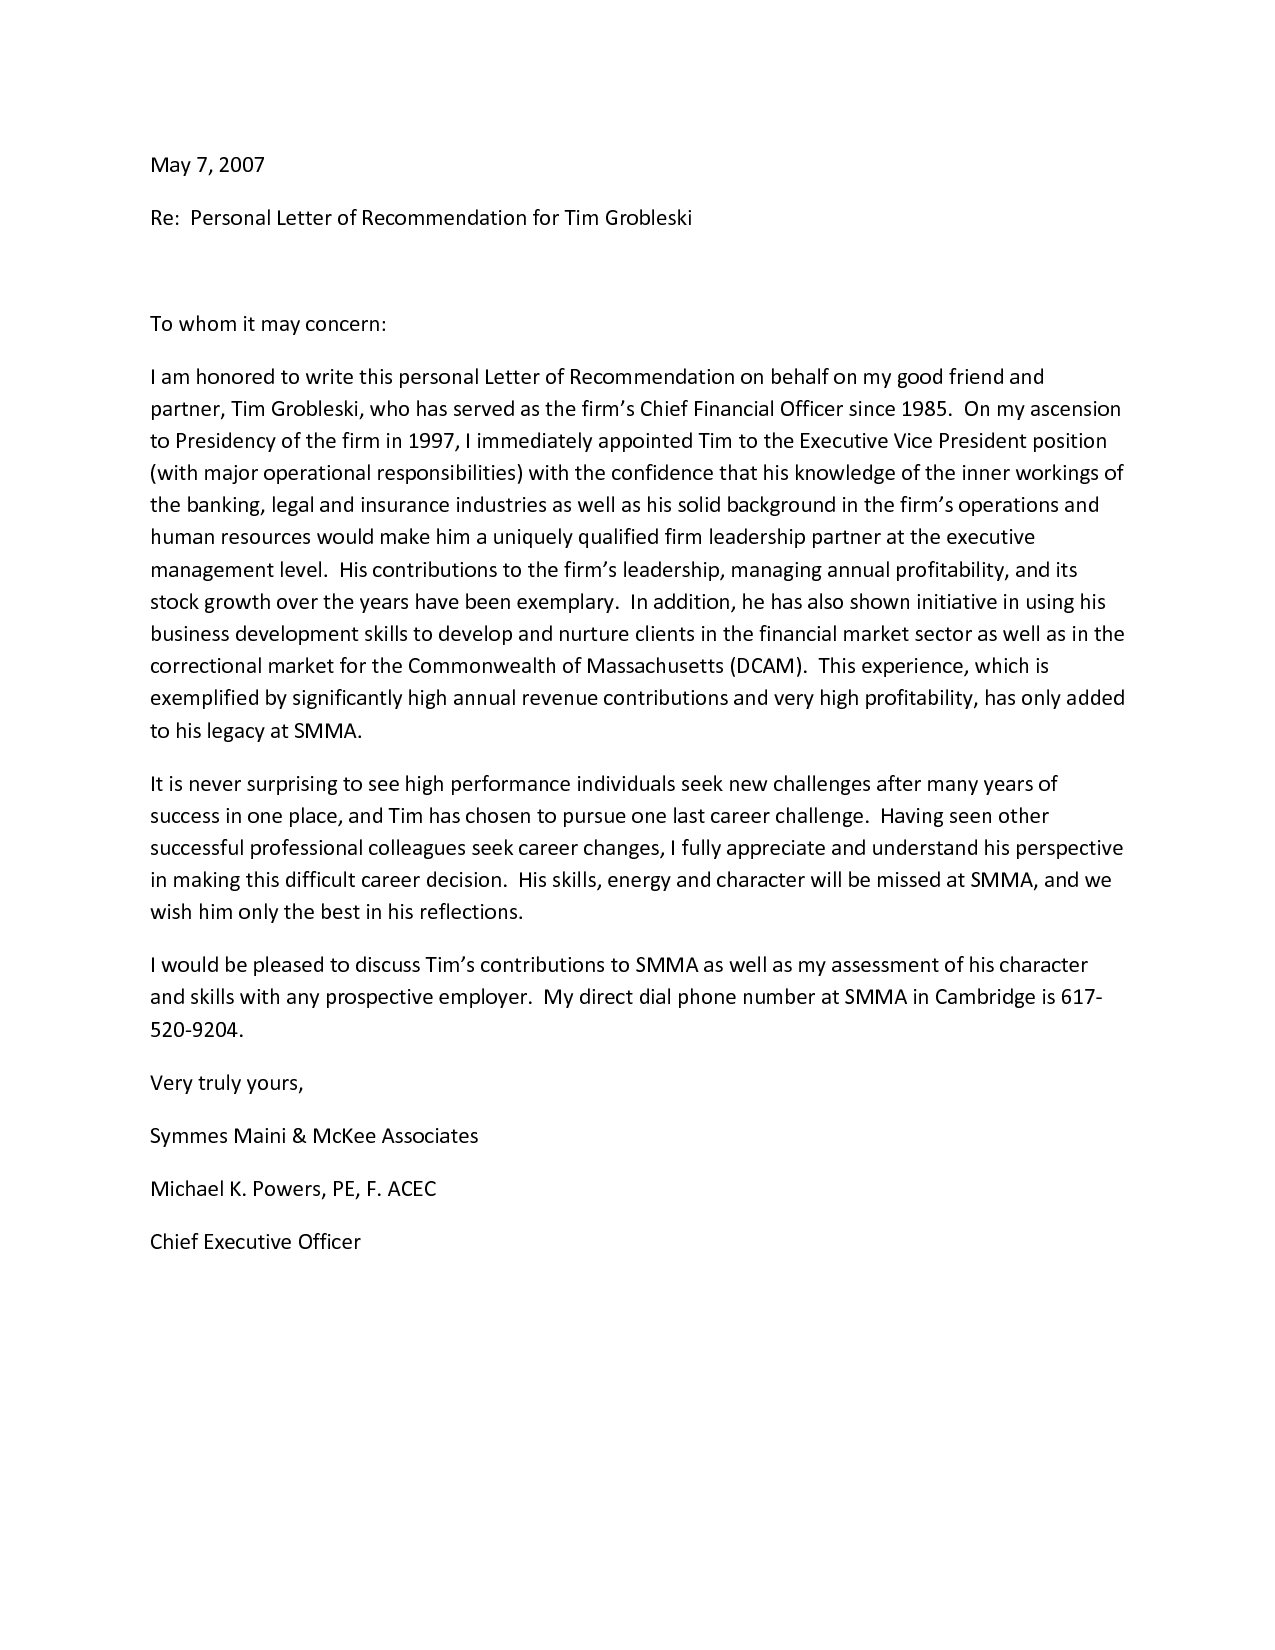 Recommendation Letter For A Friend Template with dimensions 1275 X 1650